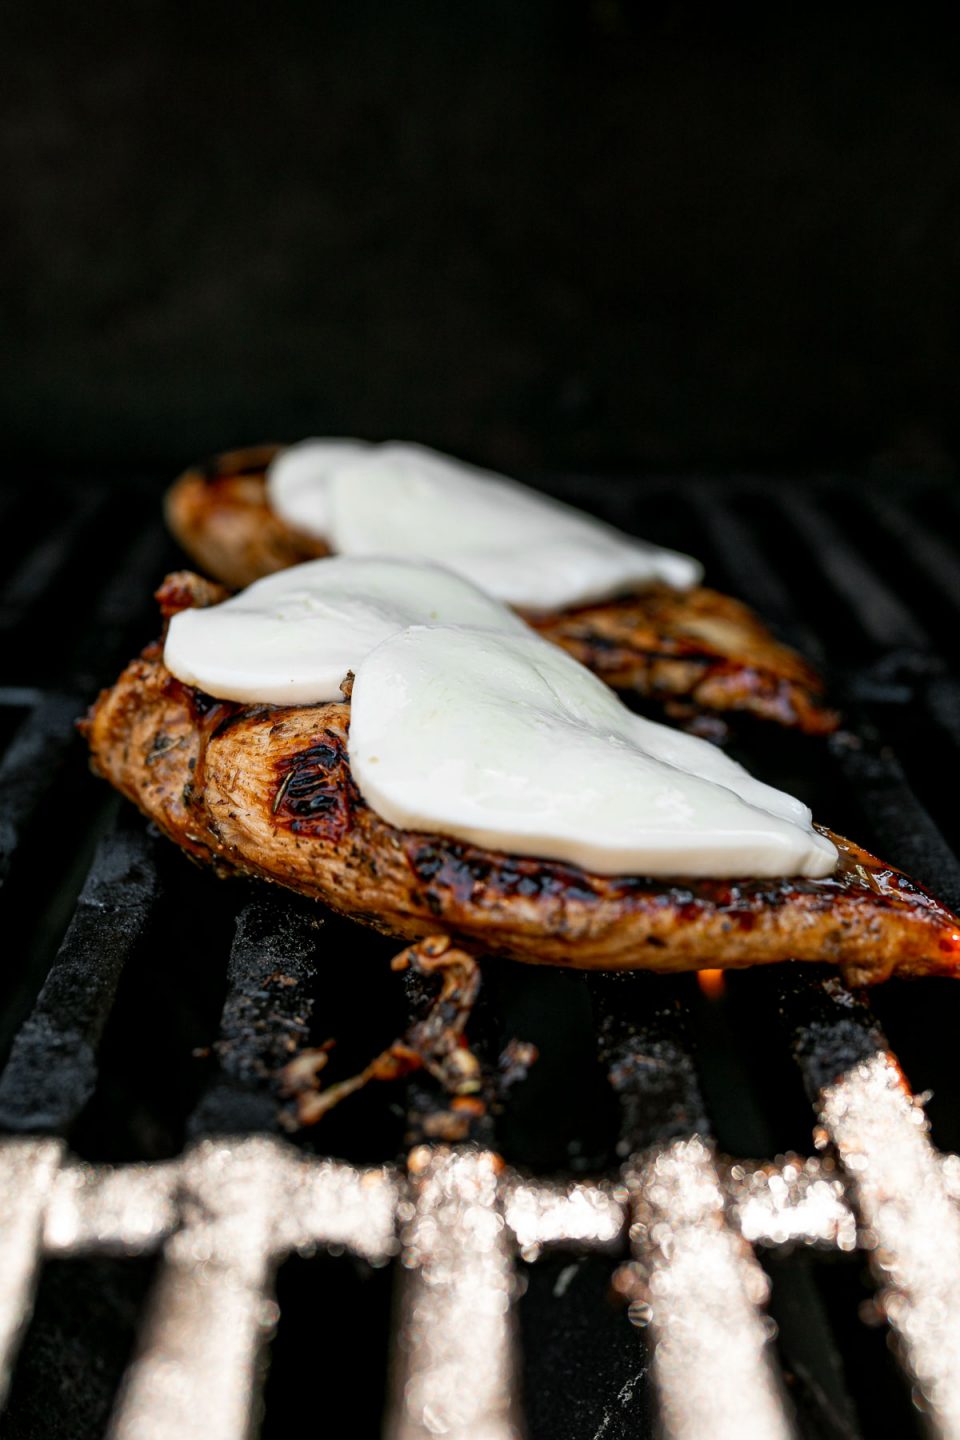 A close up of 2 balsamic-marinated grilled chicken breasts being cooked on a gas grill. The 2 chicken breasts rest on the gas grill grates after being flipped once & have been topped with fresh mozzarella cheese that is beginning to melt over top.